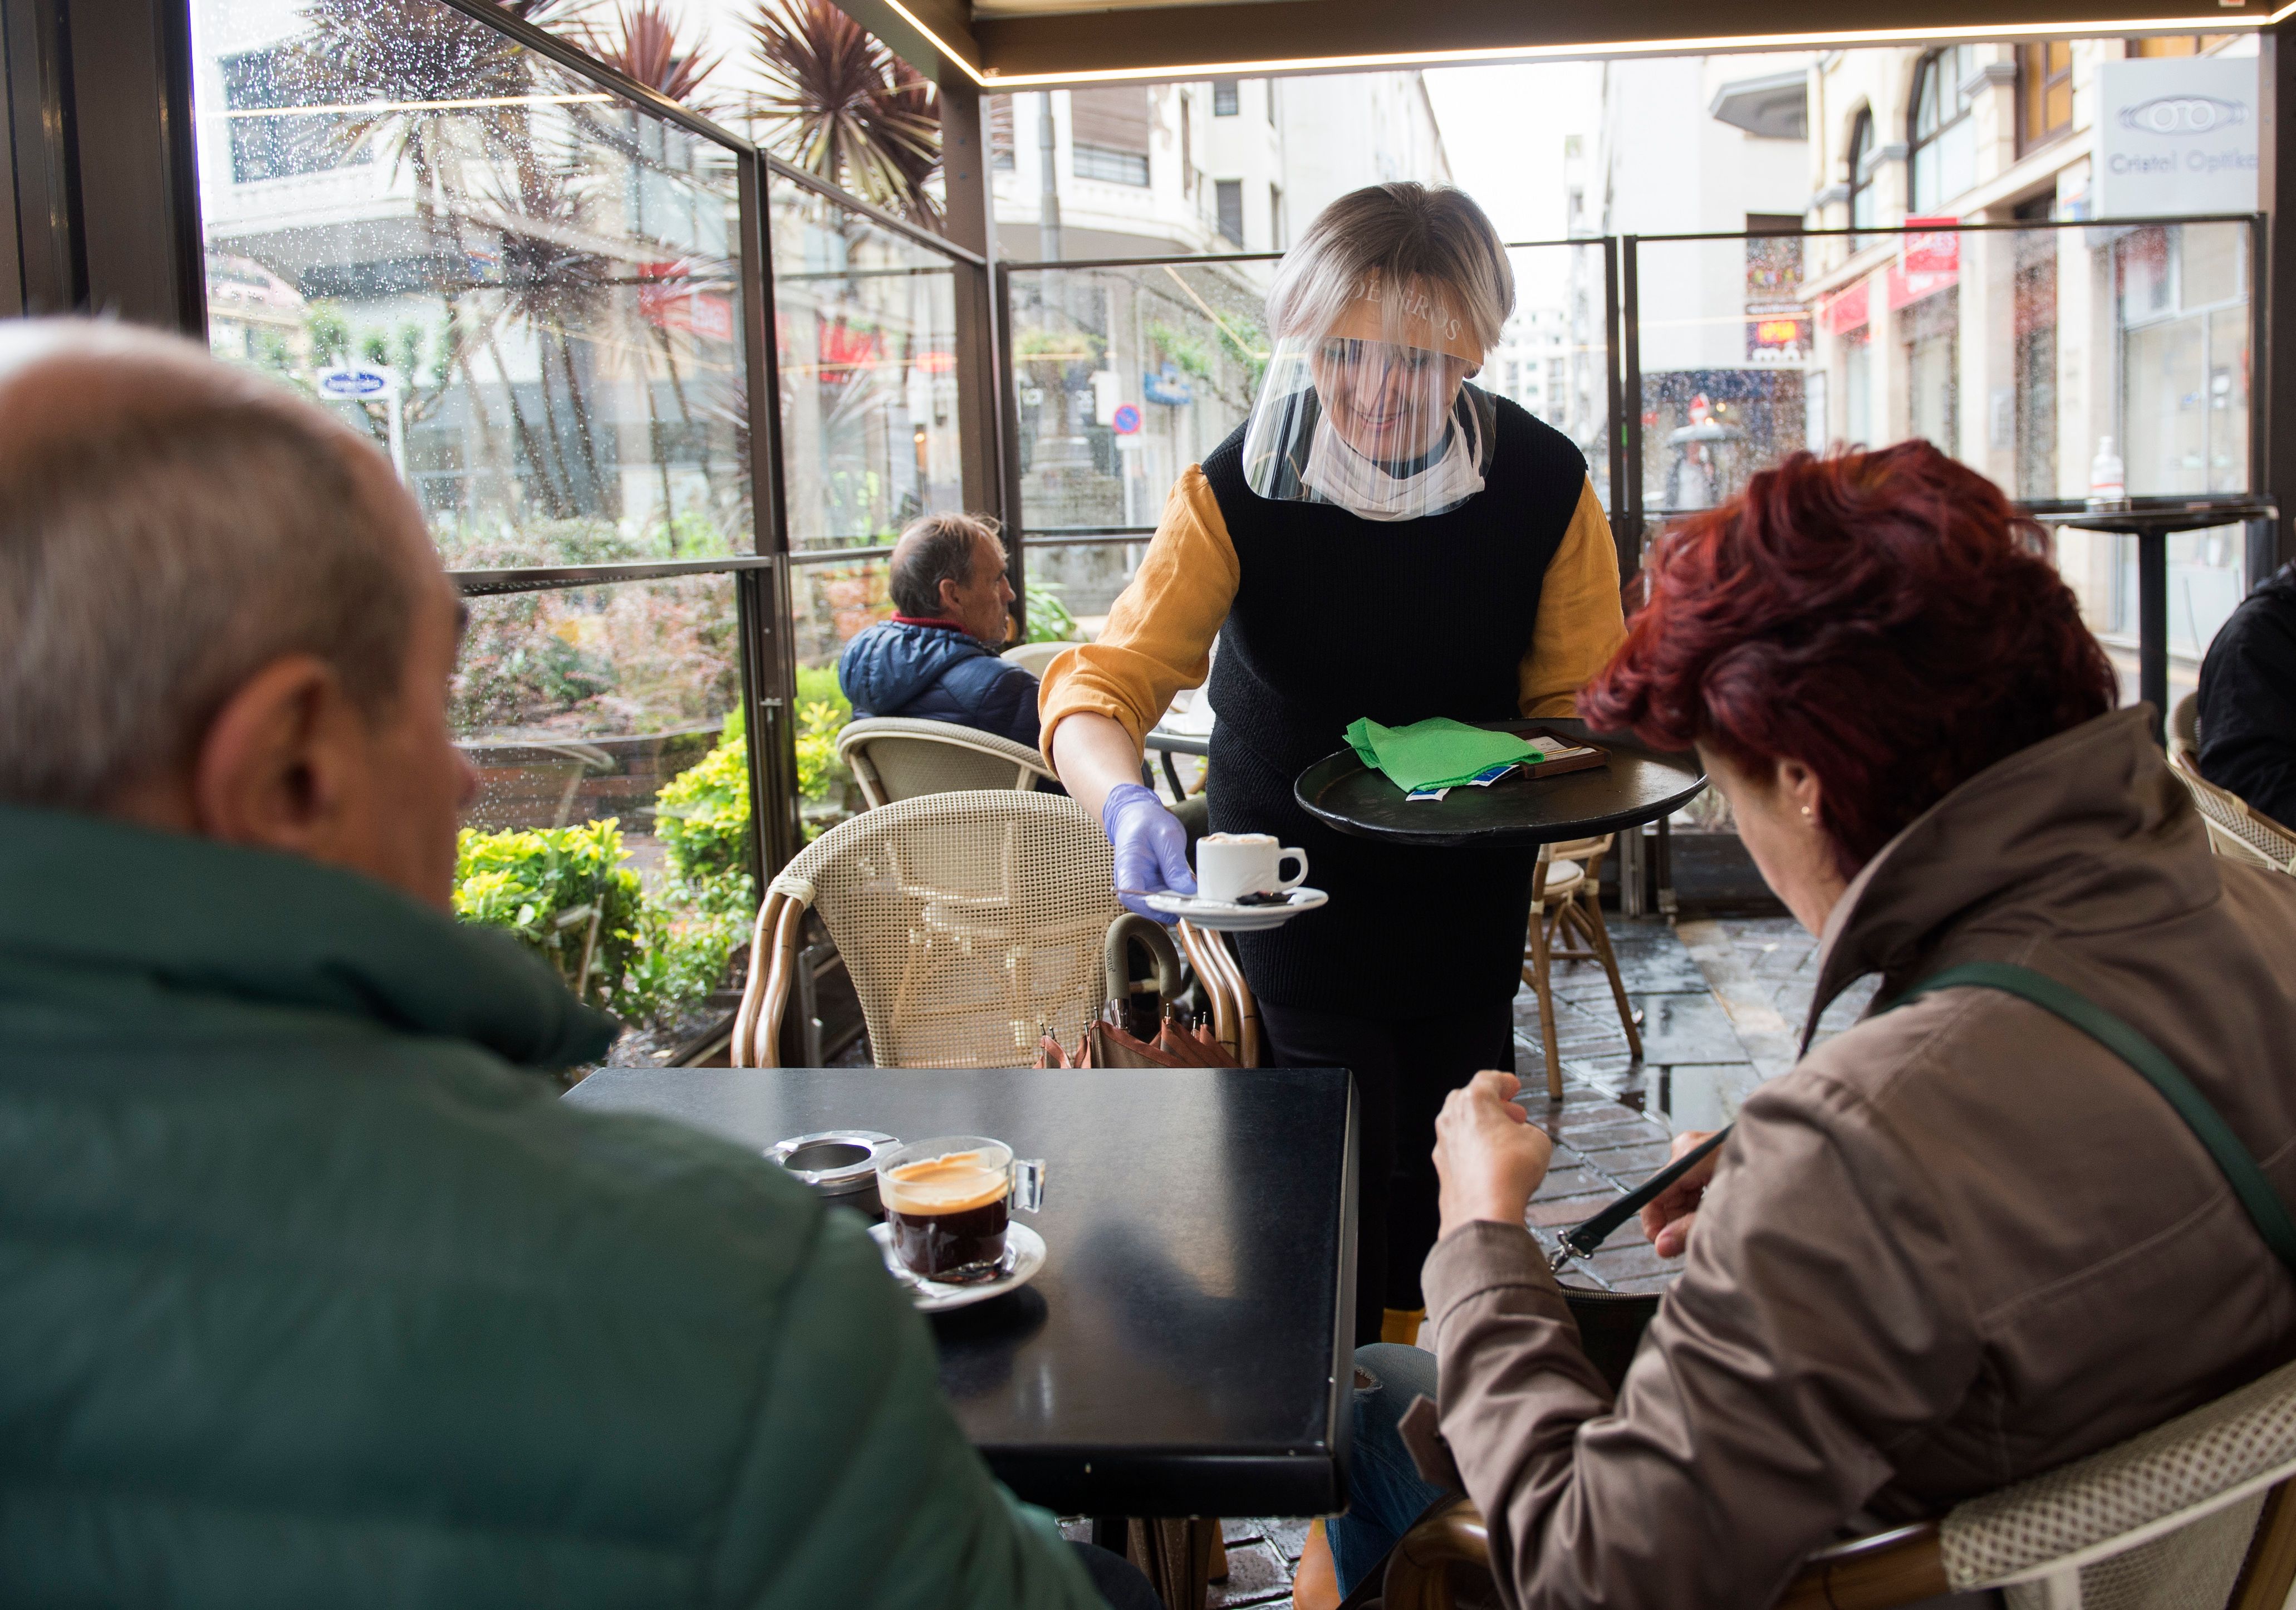 An employee serves coffee wearing a face shield and gloves at a cafeteria in the Spanish Basque city of San Sebastian on May 11, 2020. (Photo by ANDER GILLENEA/AFP via Getty Images)